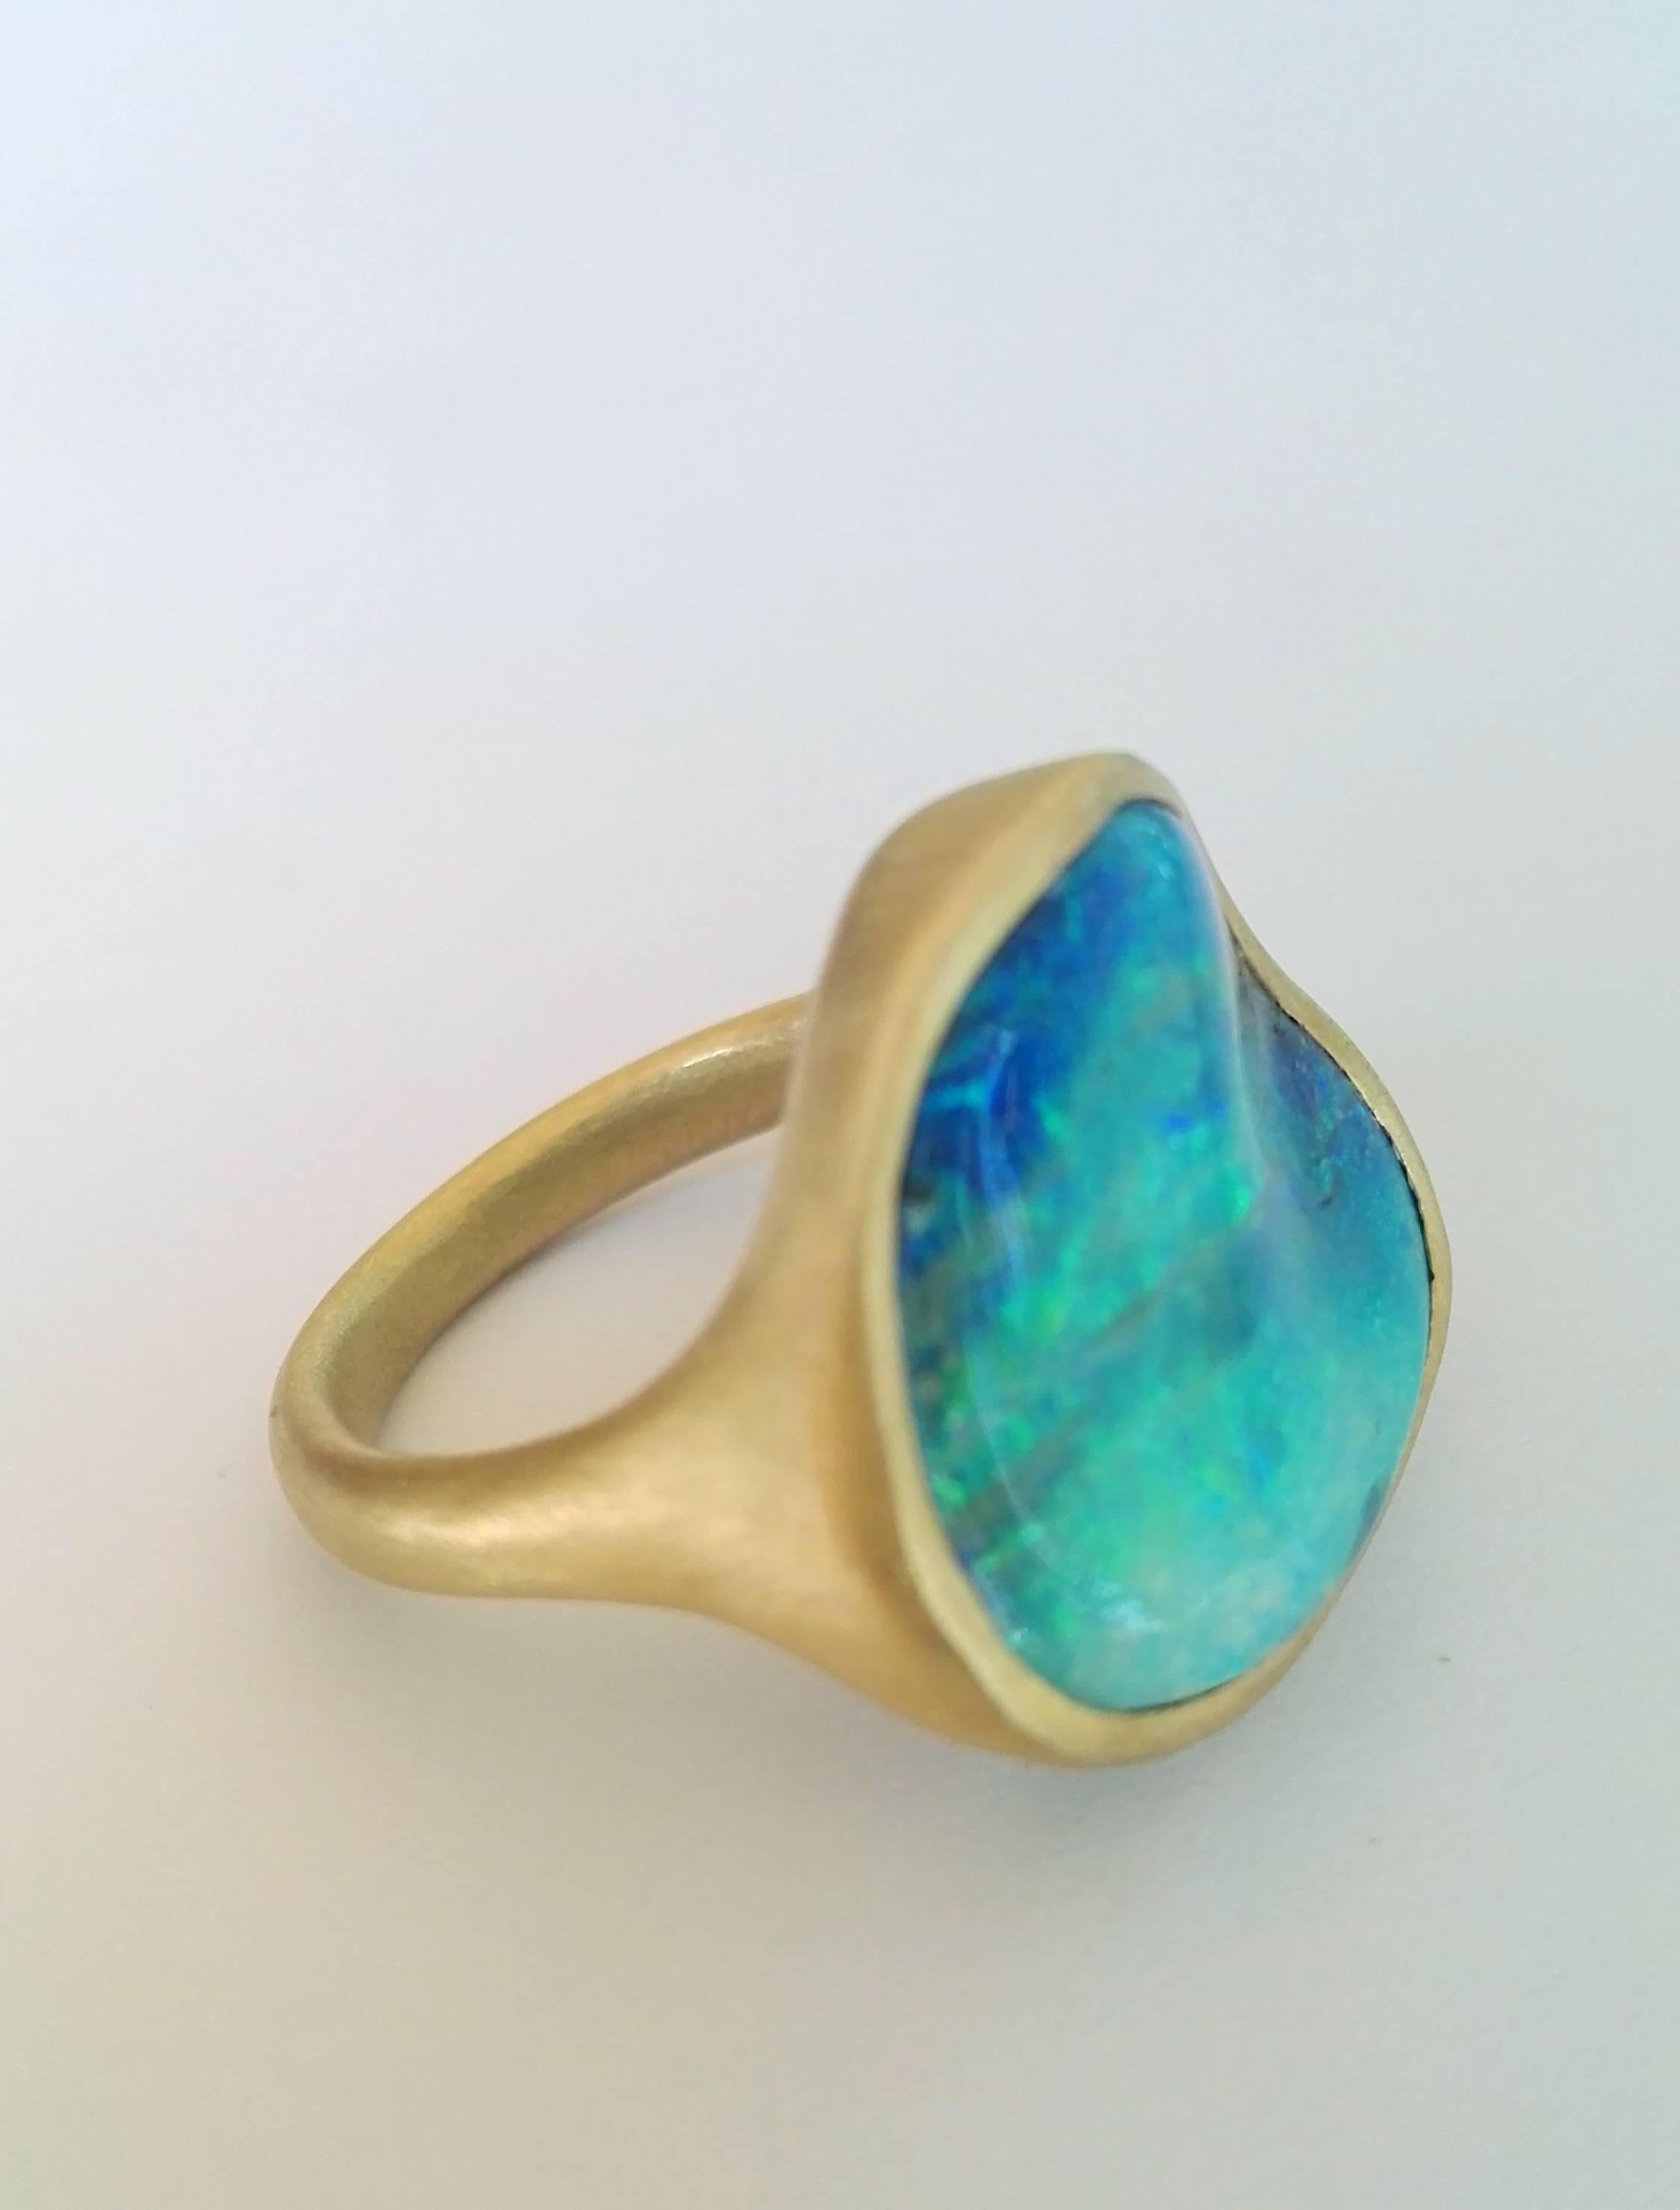 Dalben design One of a kind 18k yellow gold satin finishing ring with a 8.06 carat bezel-set magnificent Boulder Opal.
This Australian Bouder Opal seems the Sardinia sea.
Ring size 7  1/4  - EU 55 re-sizable to most finger sizes.
The Ring has